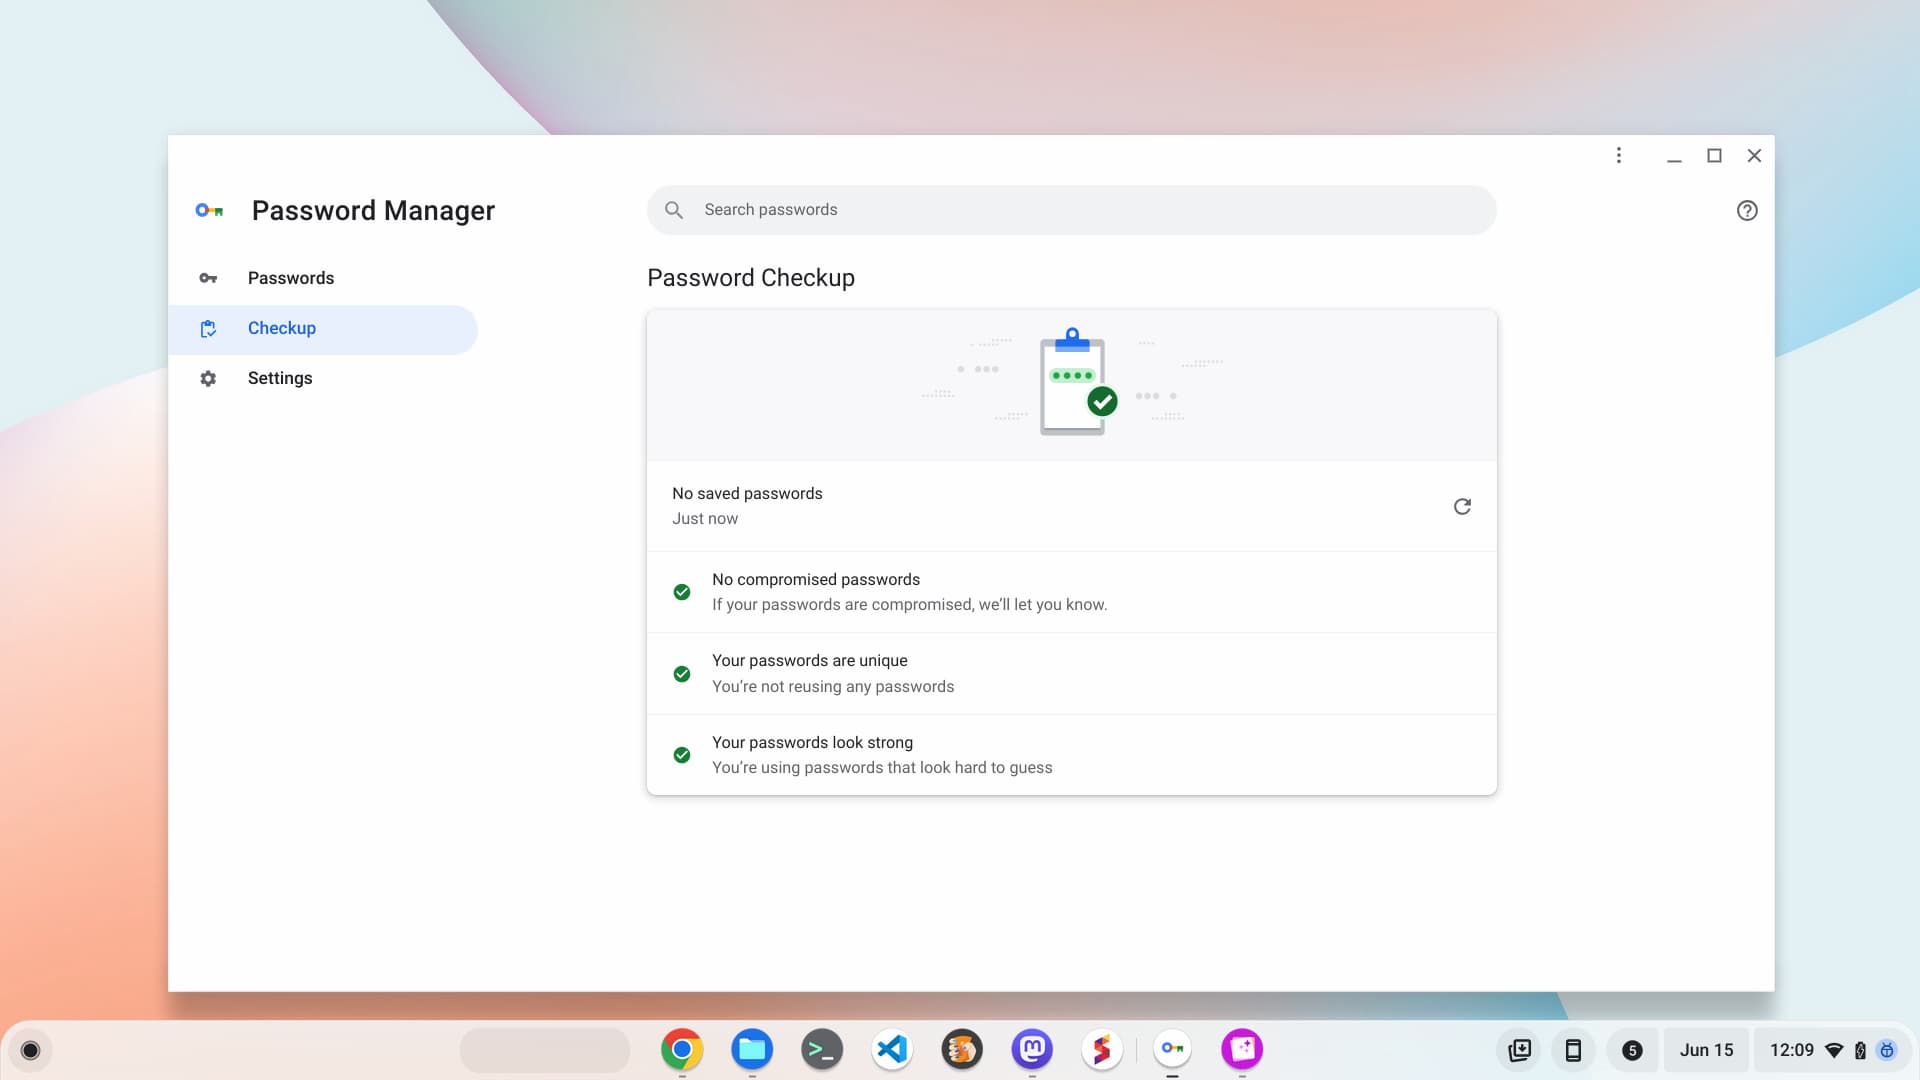 The Google Password Manager Chromebook app is a PWA